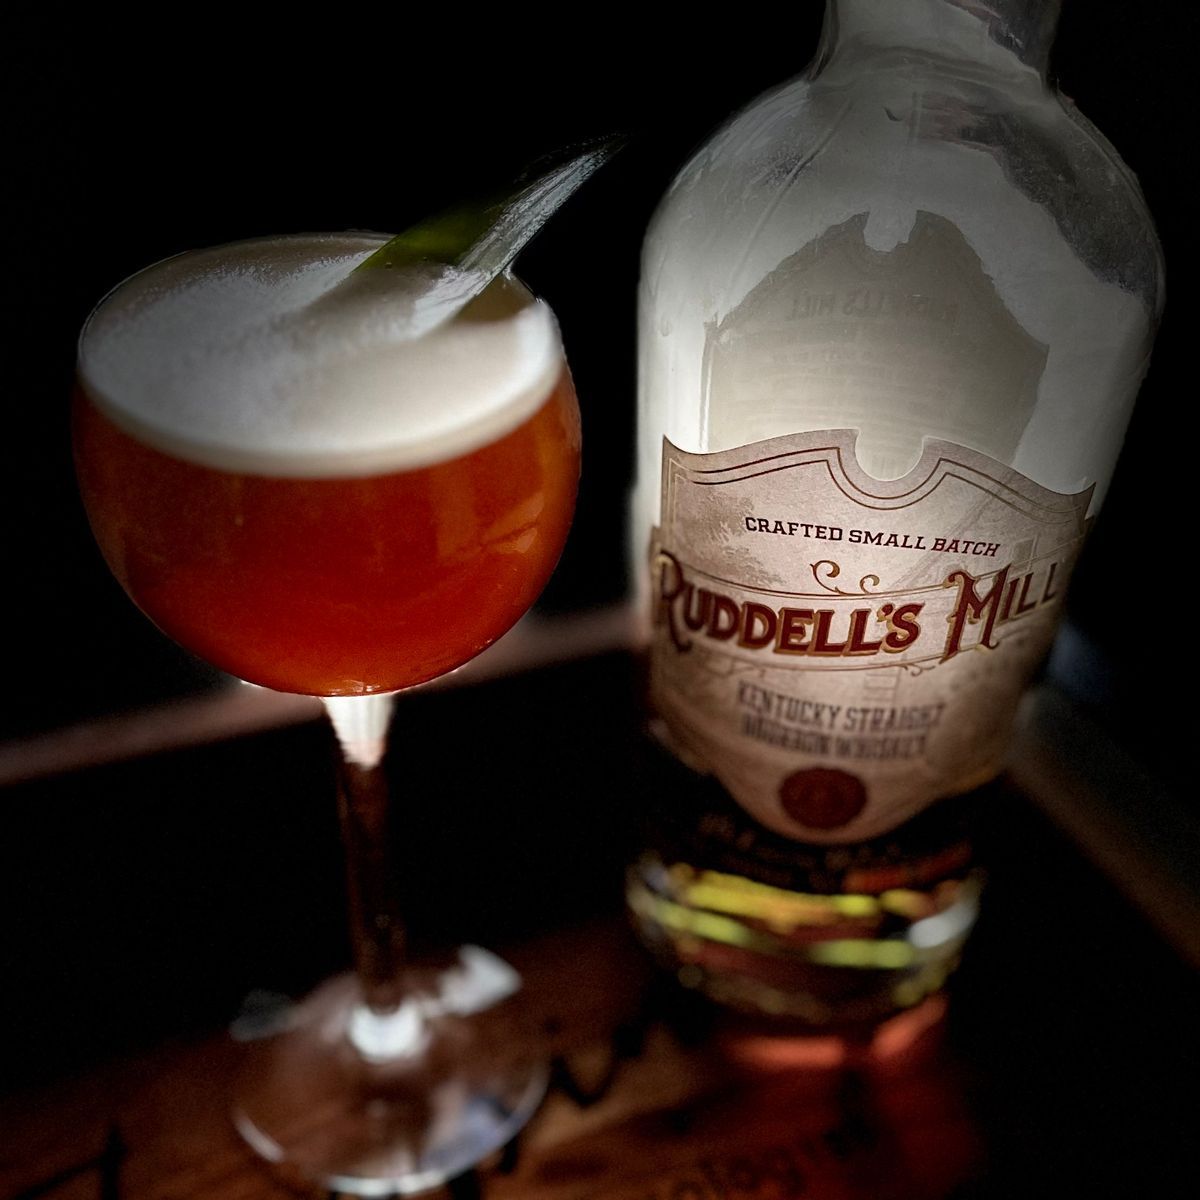 I’m in full summer mode; shaking up tiki-style drinks left and right. But I miss my bourbon, so I decided to try out a tiki bourbon cocktail- something to keep the summer feel and tiki flavors but complimenting the woodier flavors of bourbon instead of rum. This is what I came up with!

Thank you to BG Reynolds for the incredible syrups and to Ruddell’s Mill Whiskey for the robust bourbon!